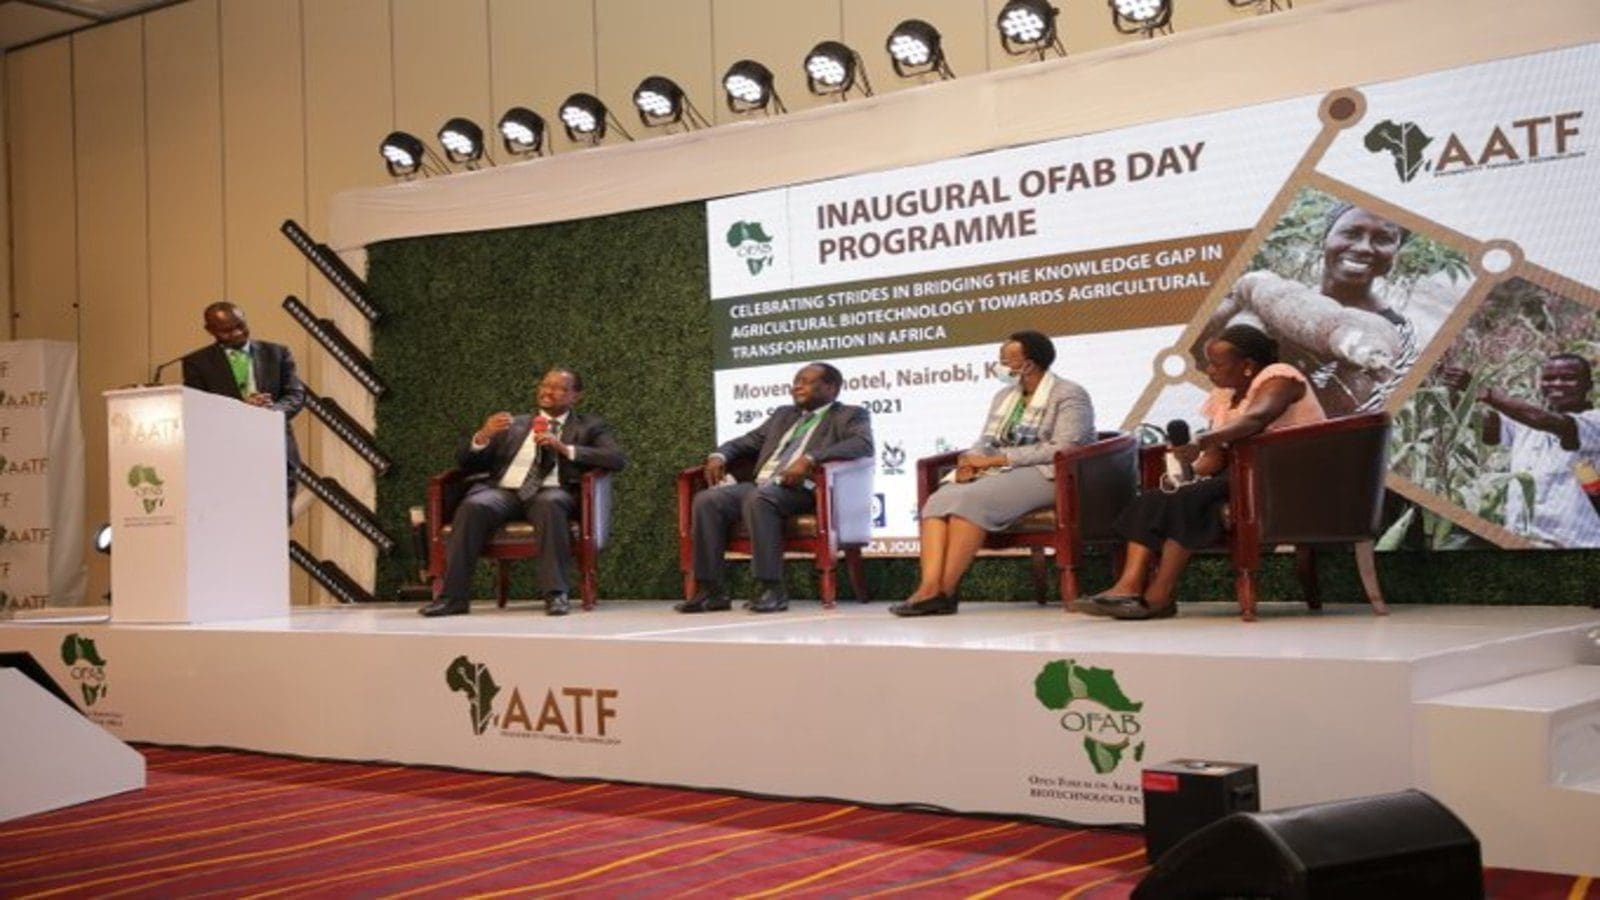 Africa launches OFAB Day to commemorate strides in agricultural biotechnology